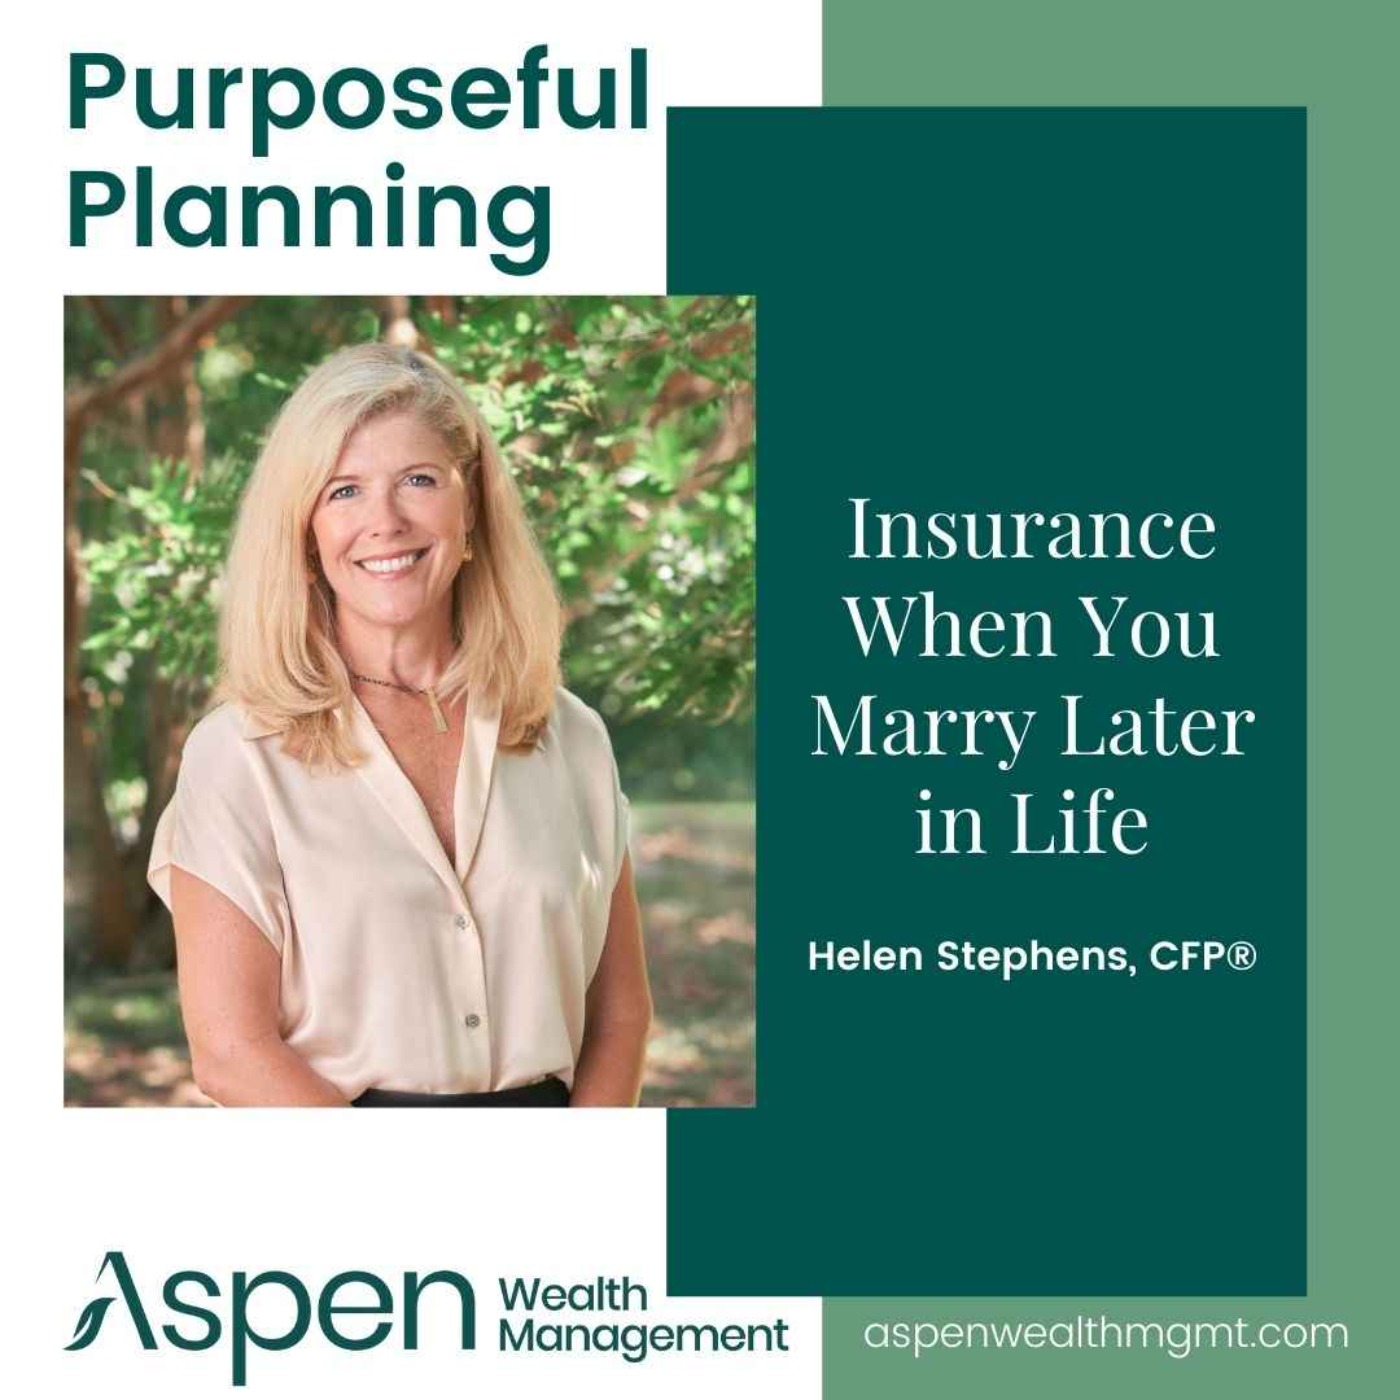 Insurance When Marrying Later in Life, Part 2